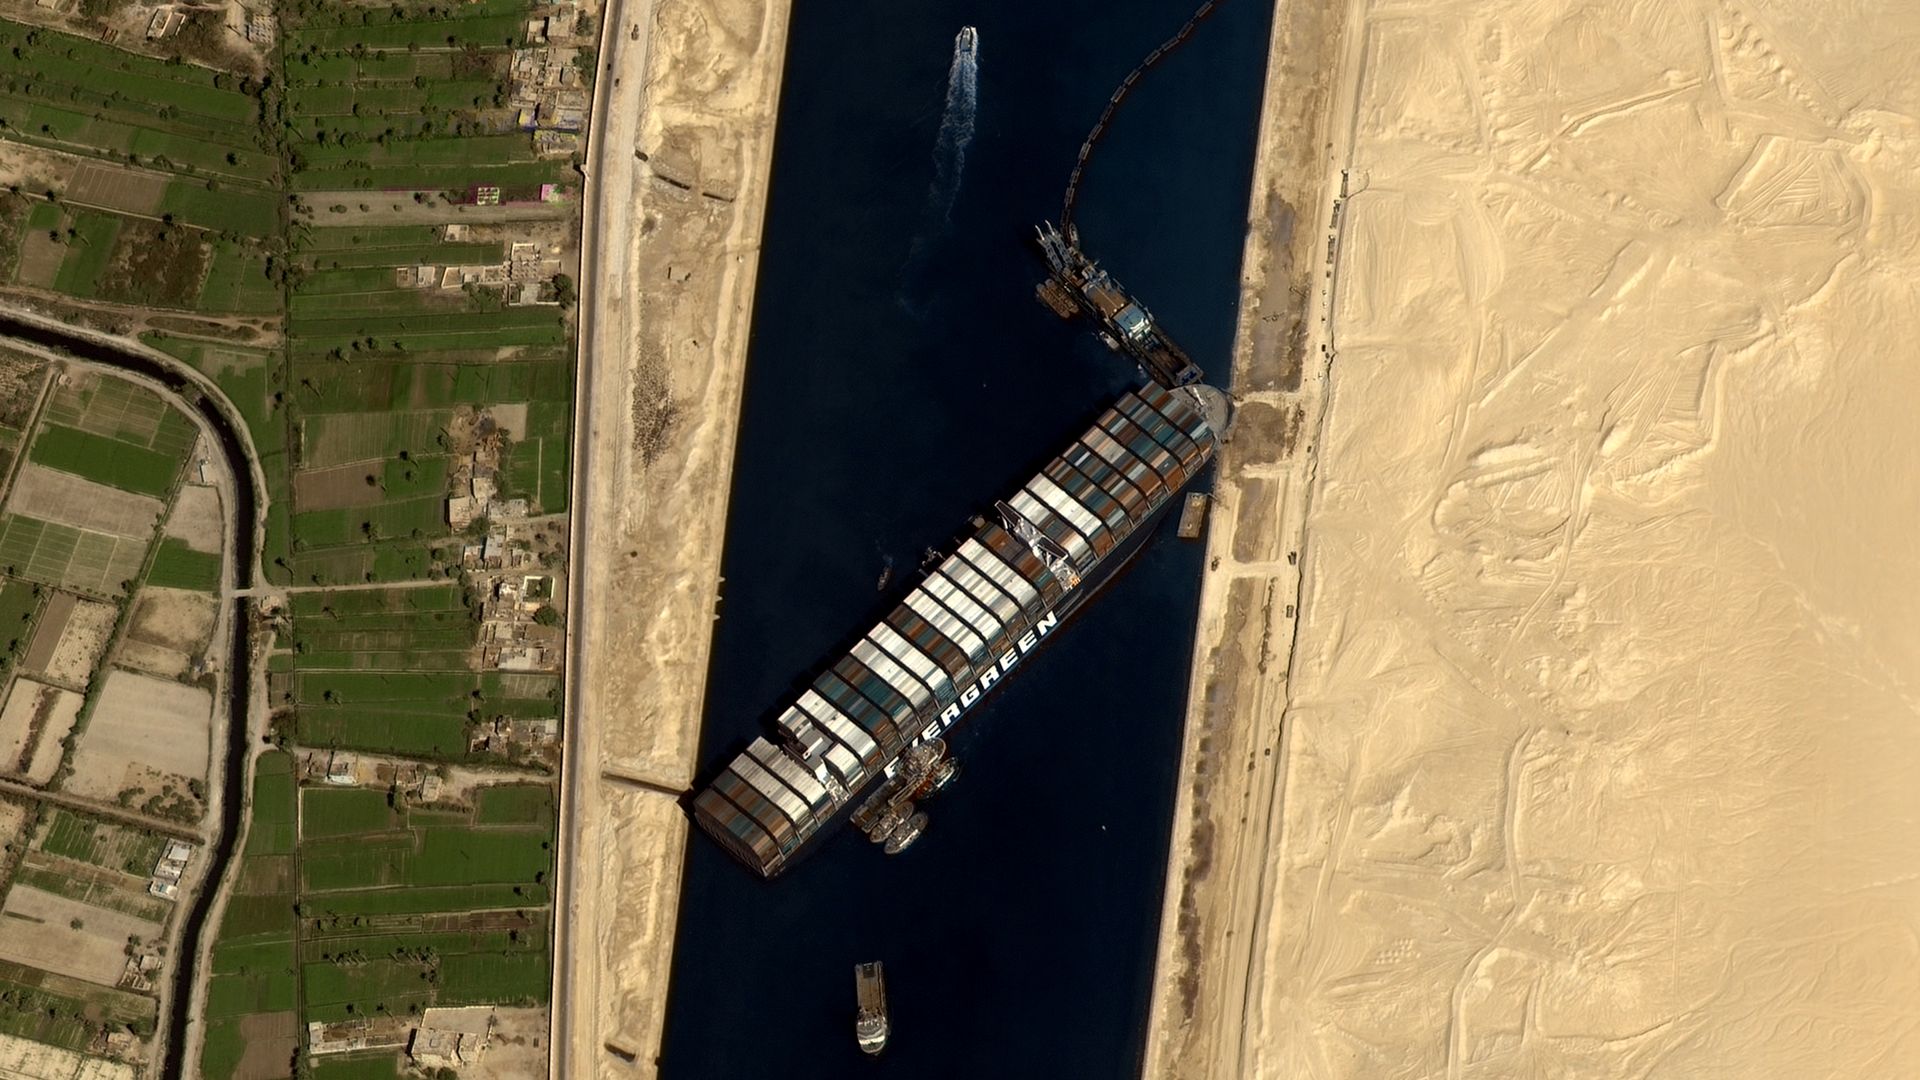 Picture of the cargo ship stuck in the Suez Canal